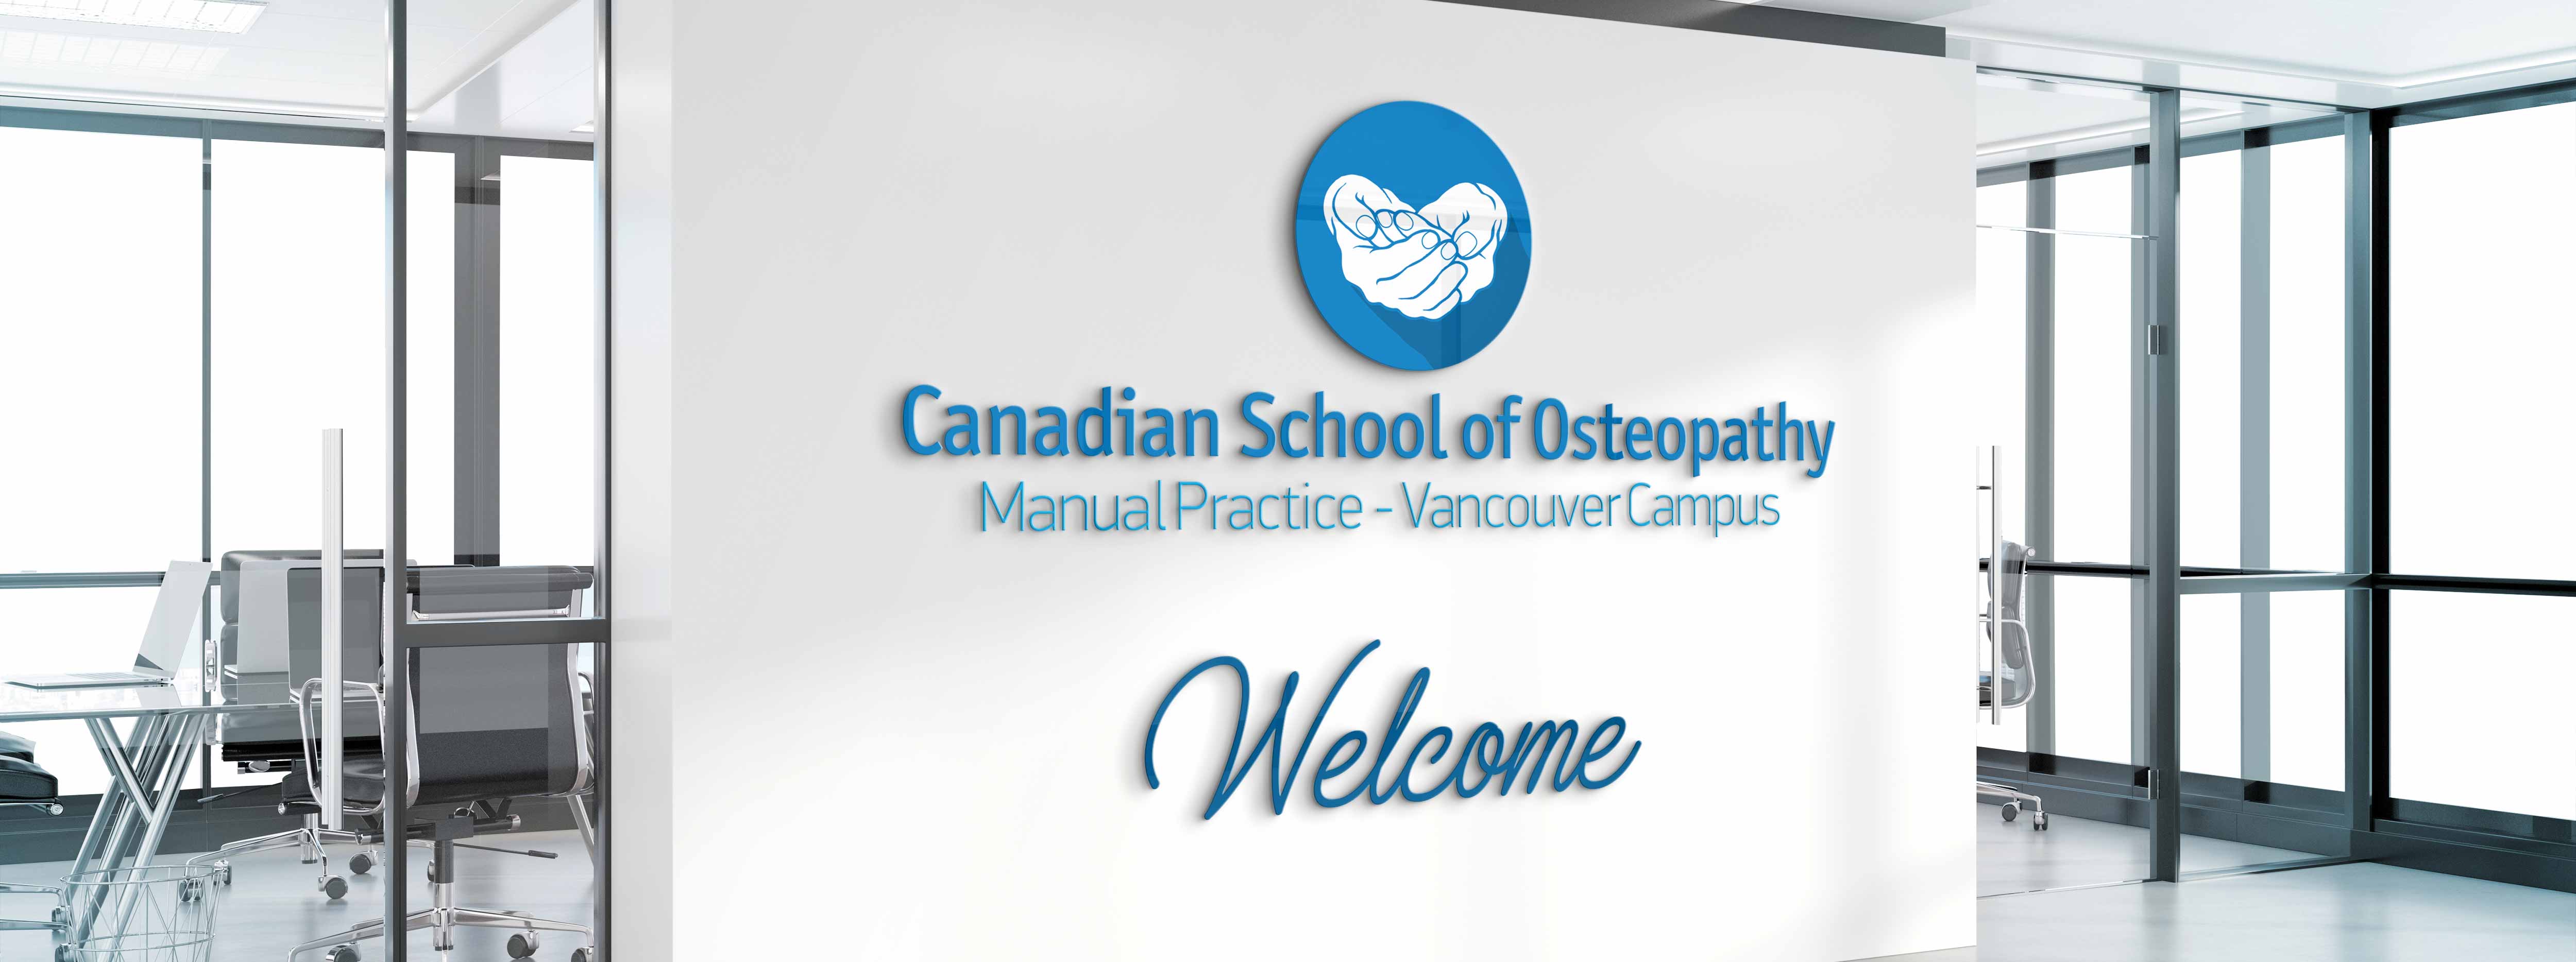 Welcome to the Canadian School of Osteopathy — Manual Pratice, Vancouver Campus